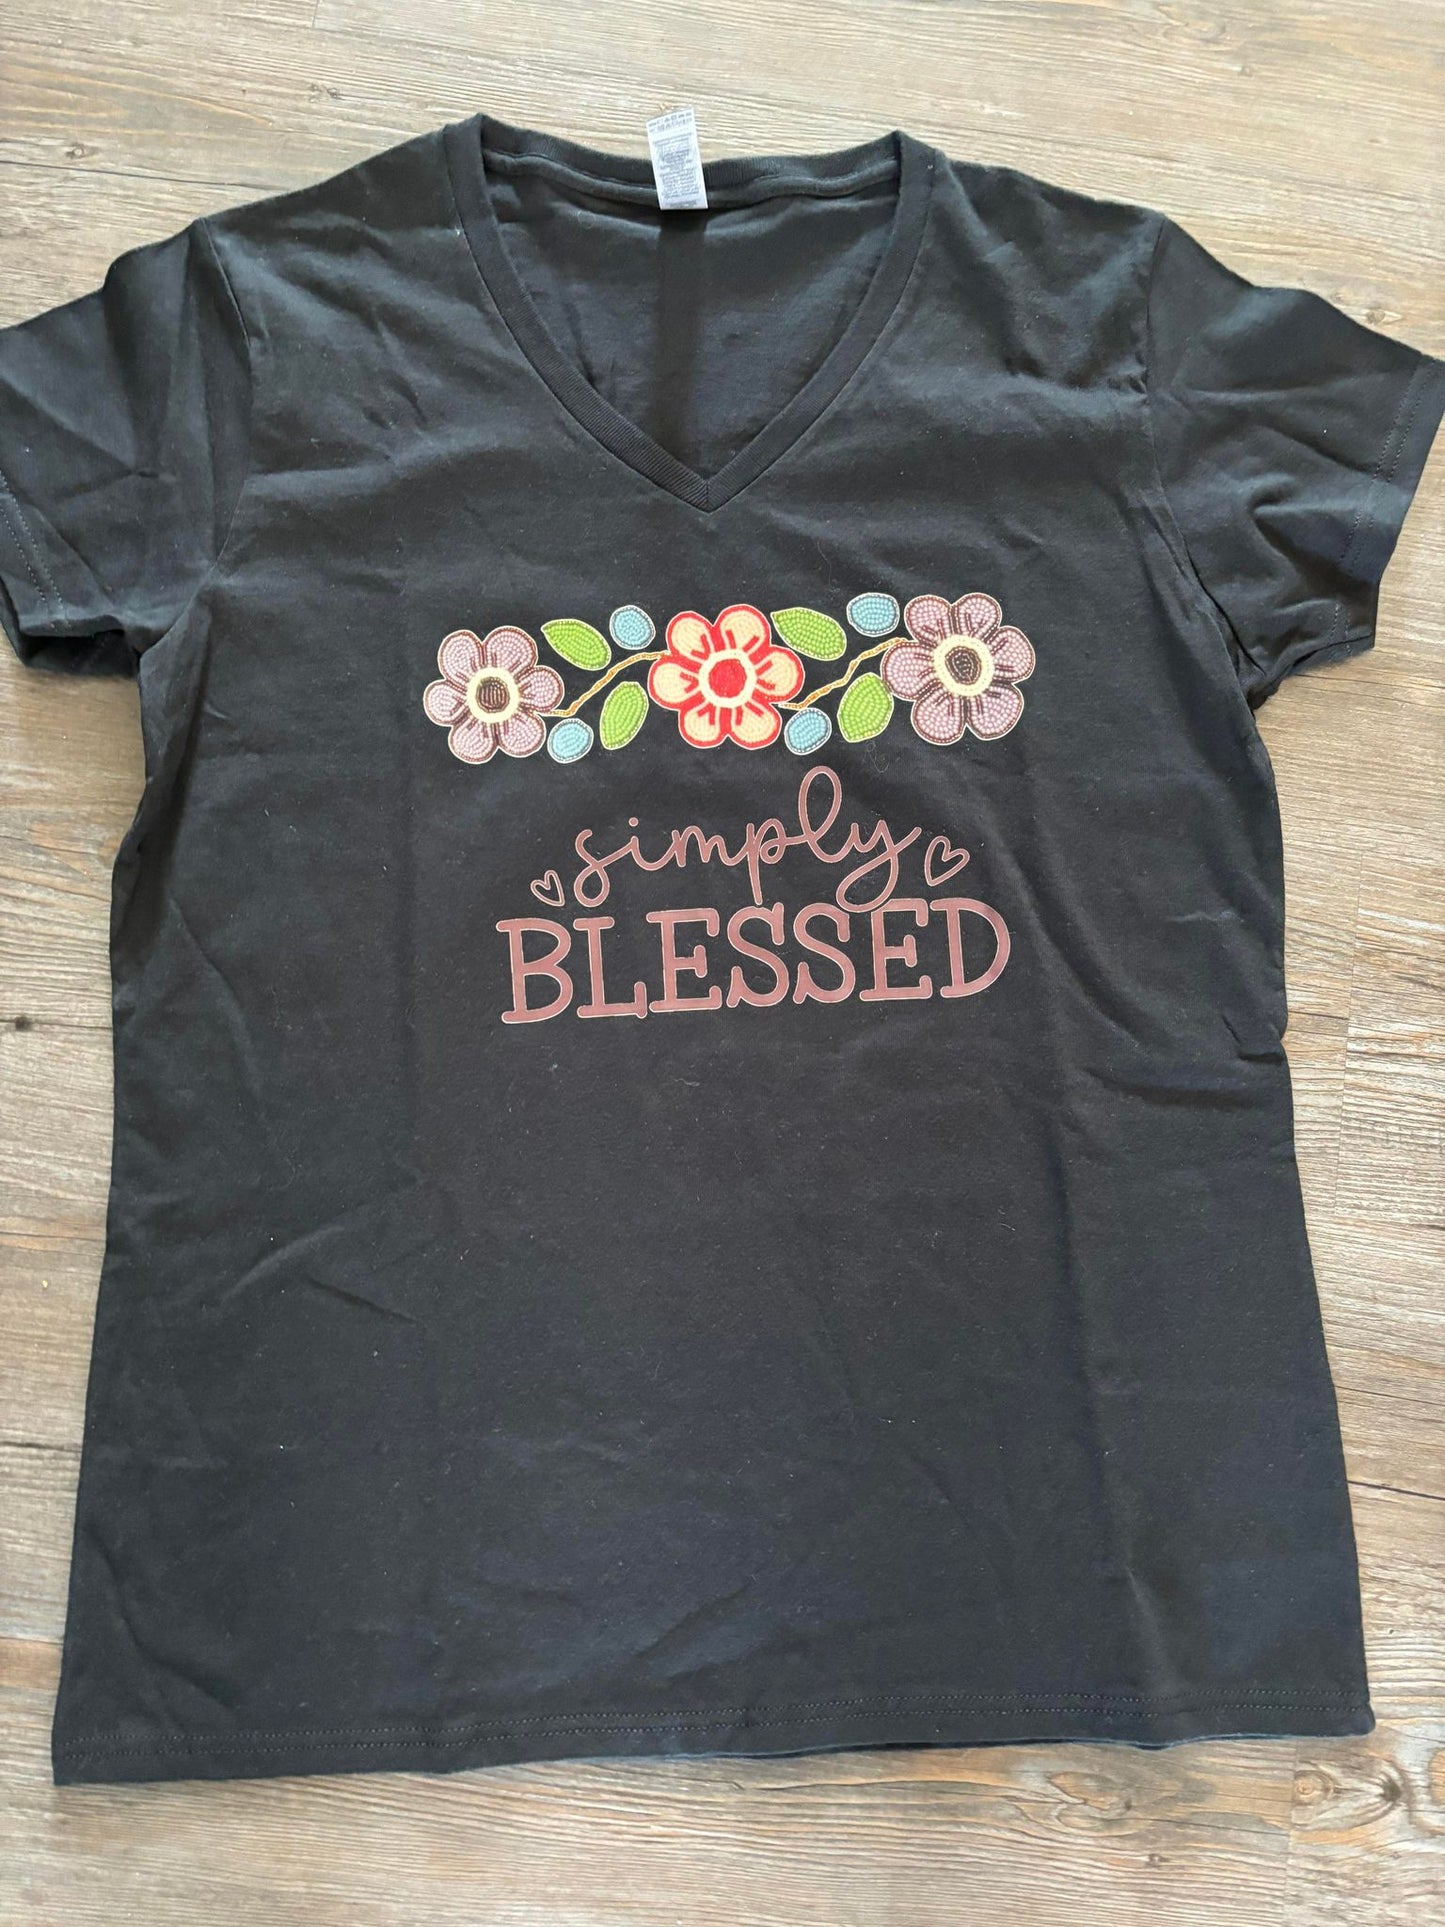 v-neck tshirt floral design and quote